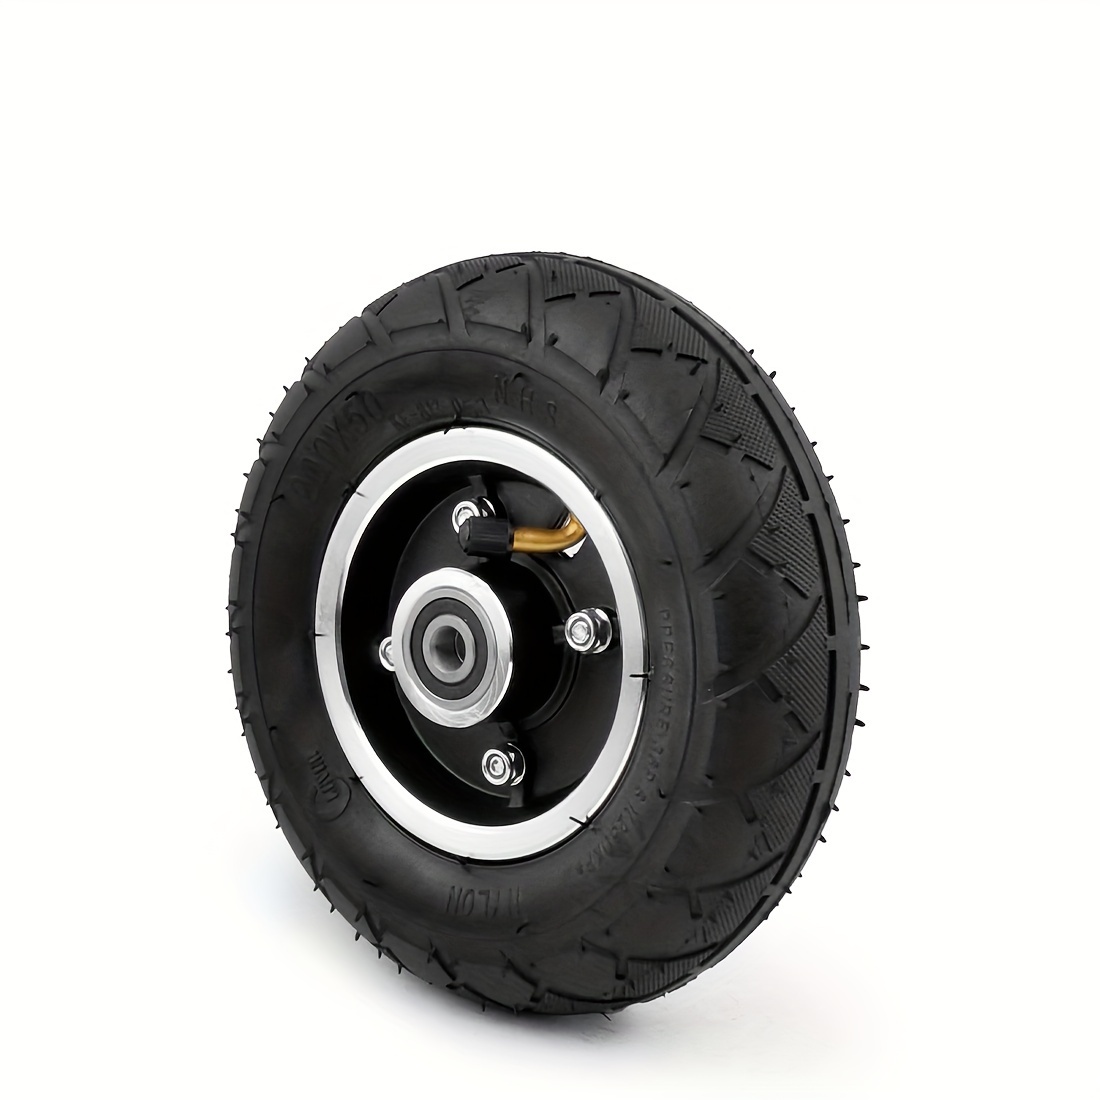 Solid Tire 10x2.50 10x2.5 Fit Fit Ninebot Max G30 G30P G30 LP Electric  Scooter 